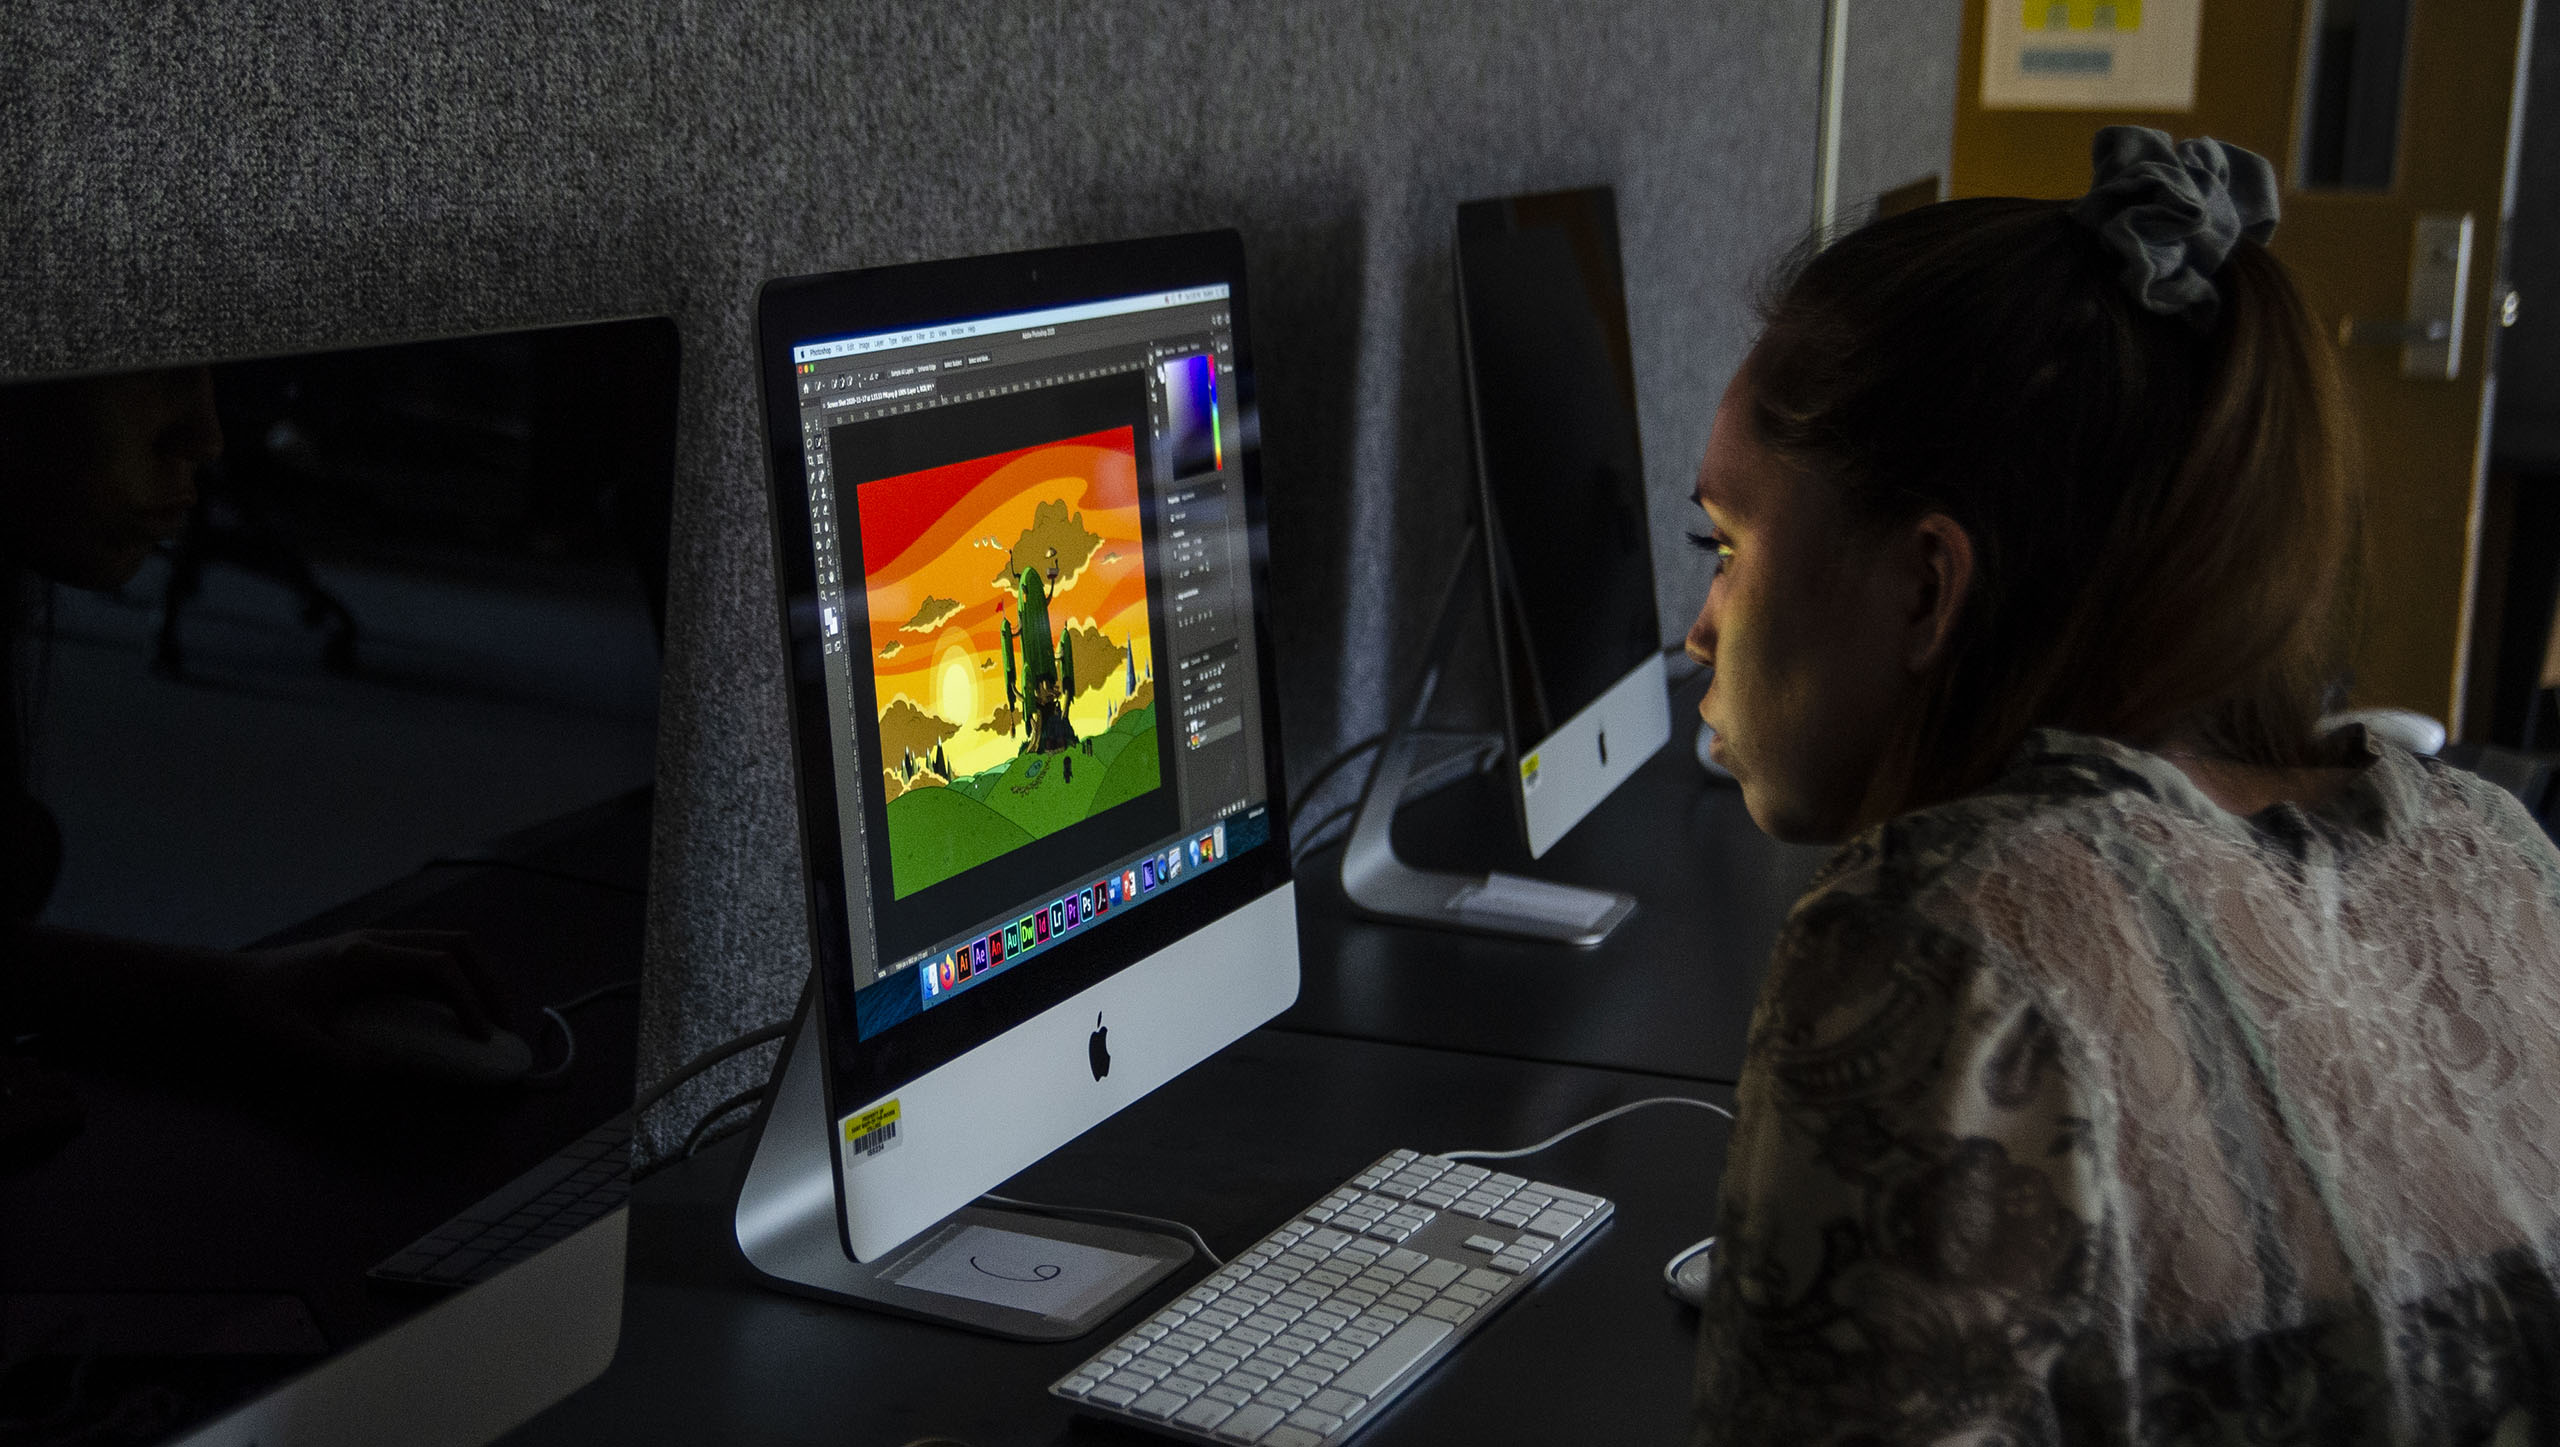 Student in computer lab working on digital art